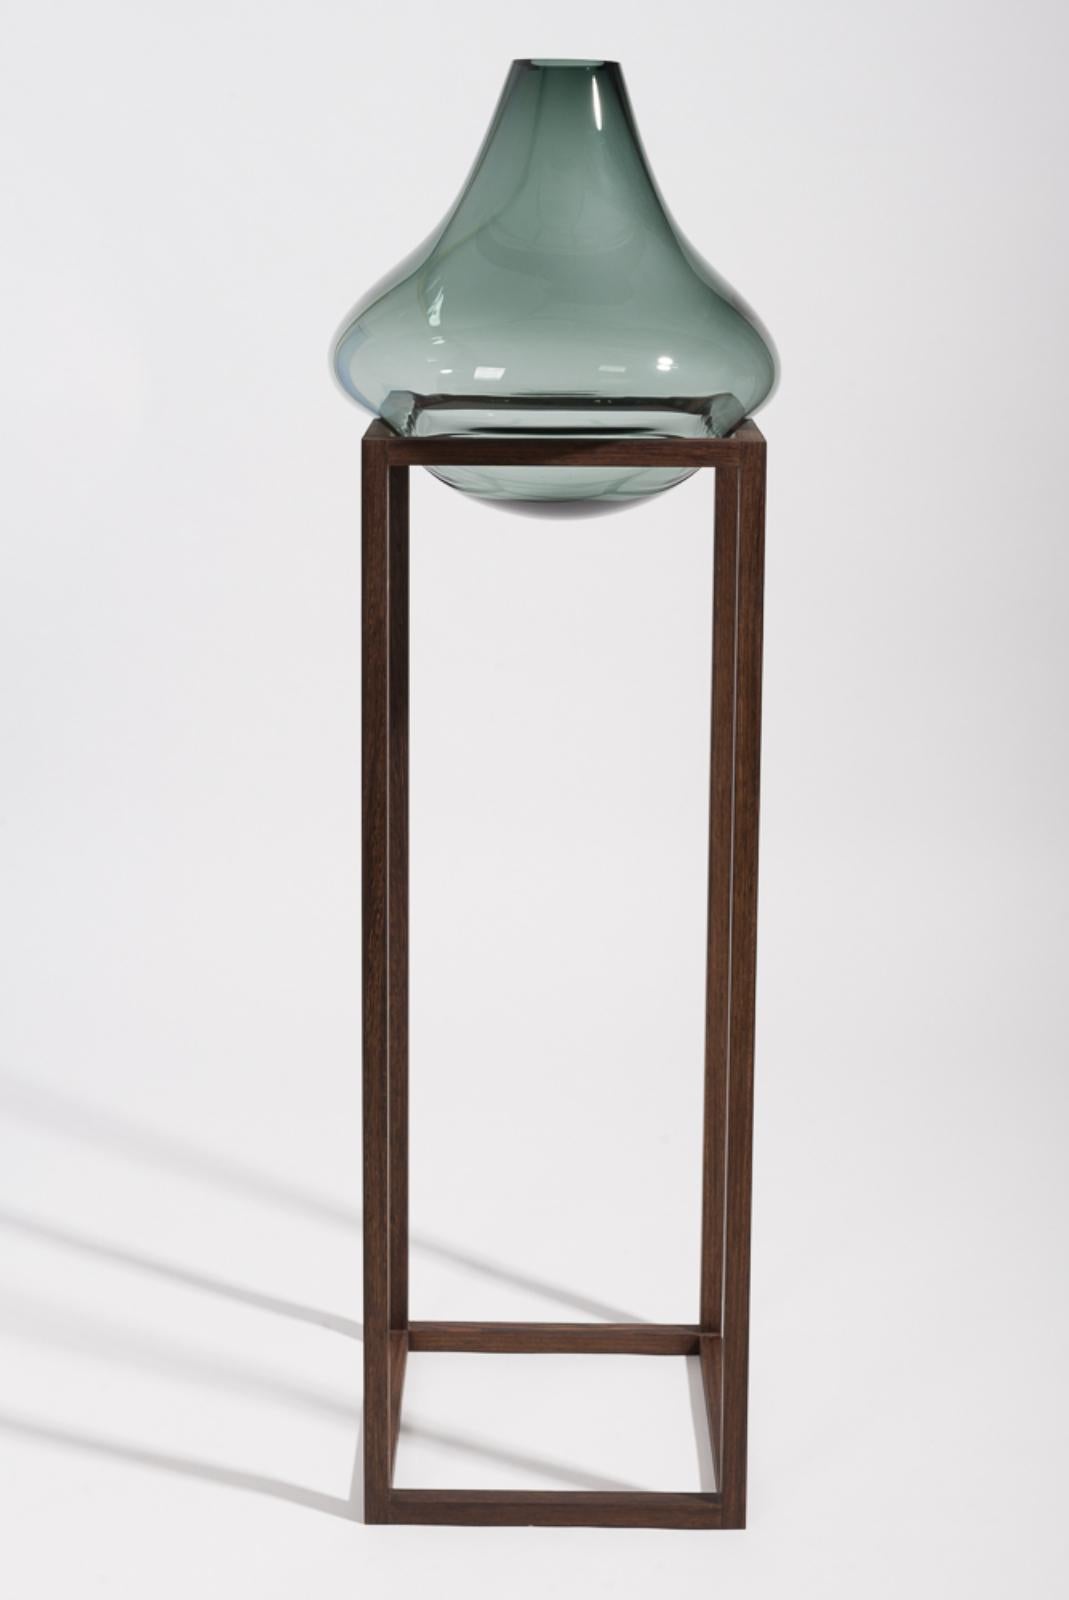 High round square green vase by Studio Thier & van Daalen
Dimensions: W 36 x D 36 x H 120 cm
Materials: Wood, Glass

When blowing soap bubbles in the air Iris & Ruben had the dream to capture these temporary beauties in a tendril frame. The